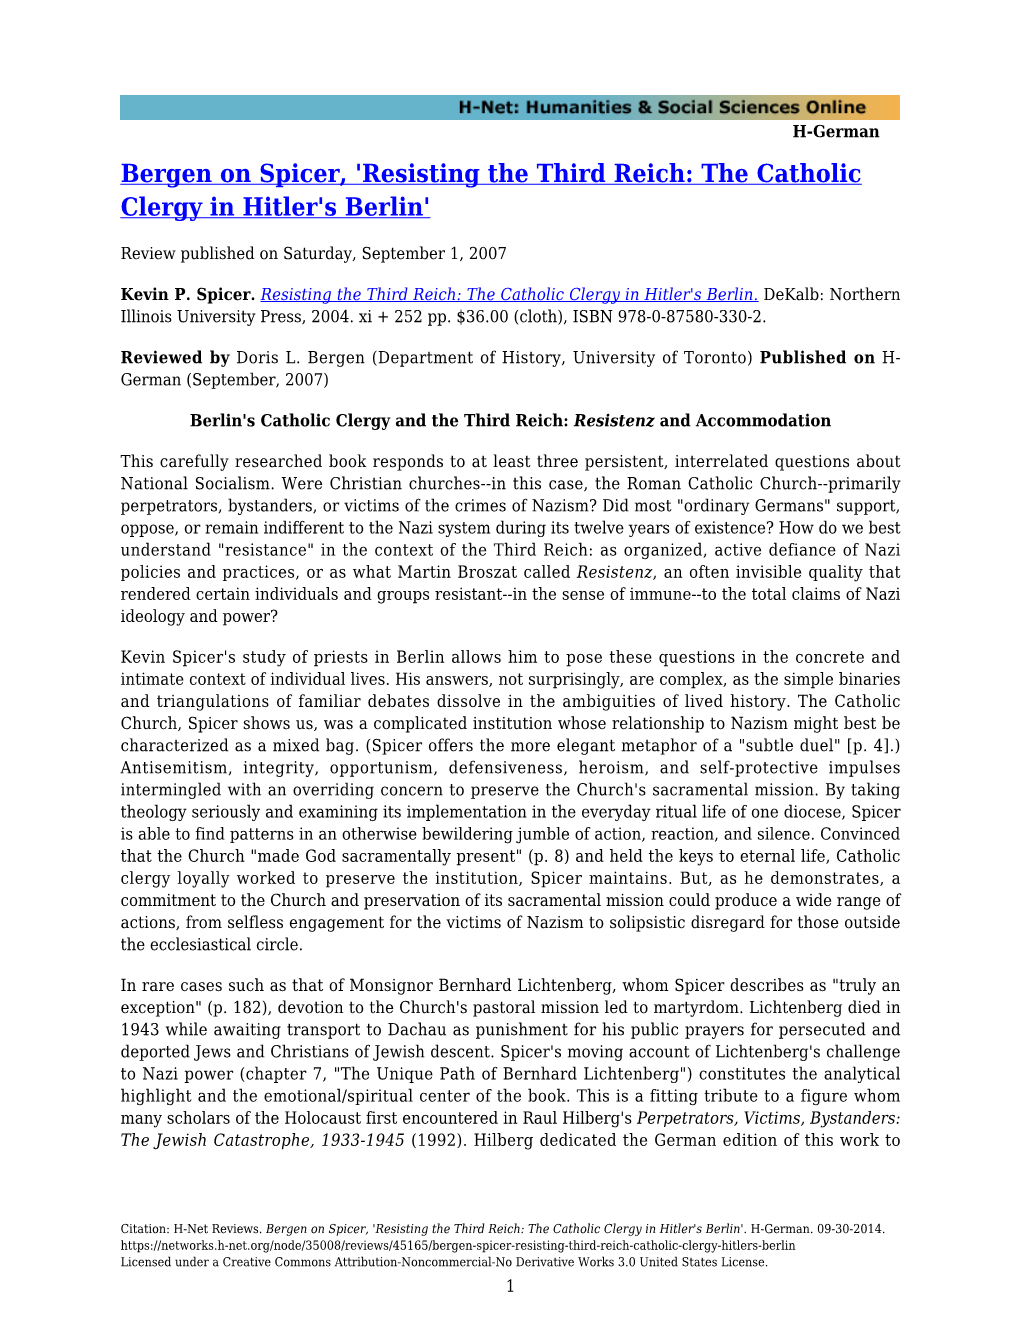 'Resisting the Third Reich: the Catholic Clergy in Hitler's Berlin'